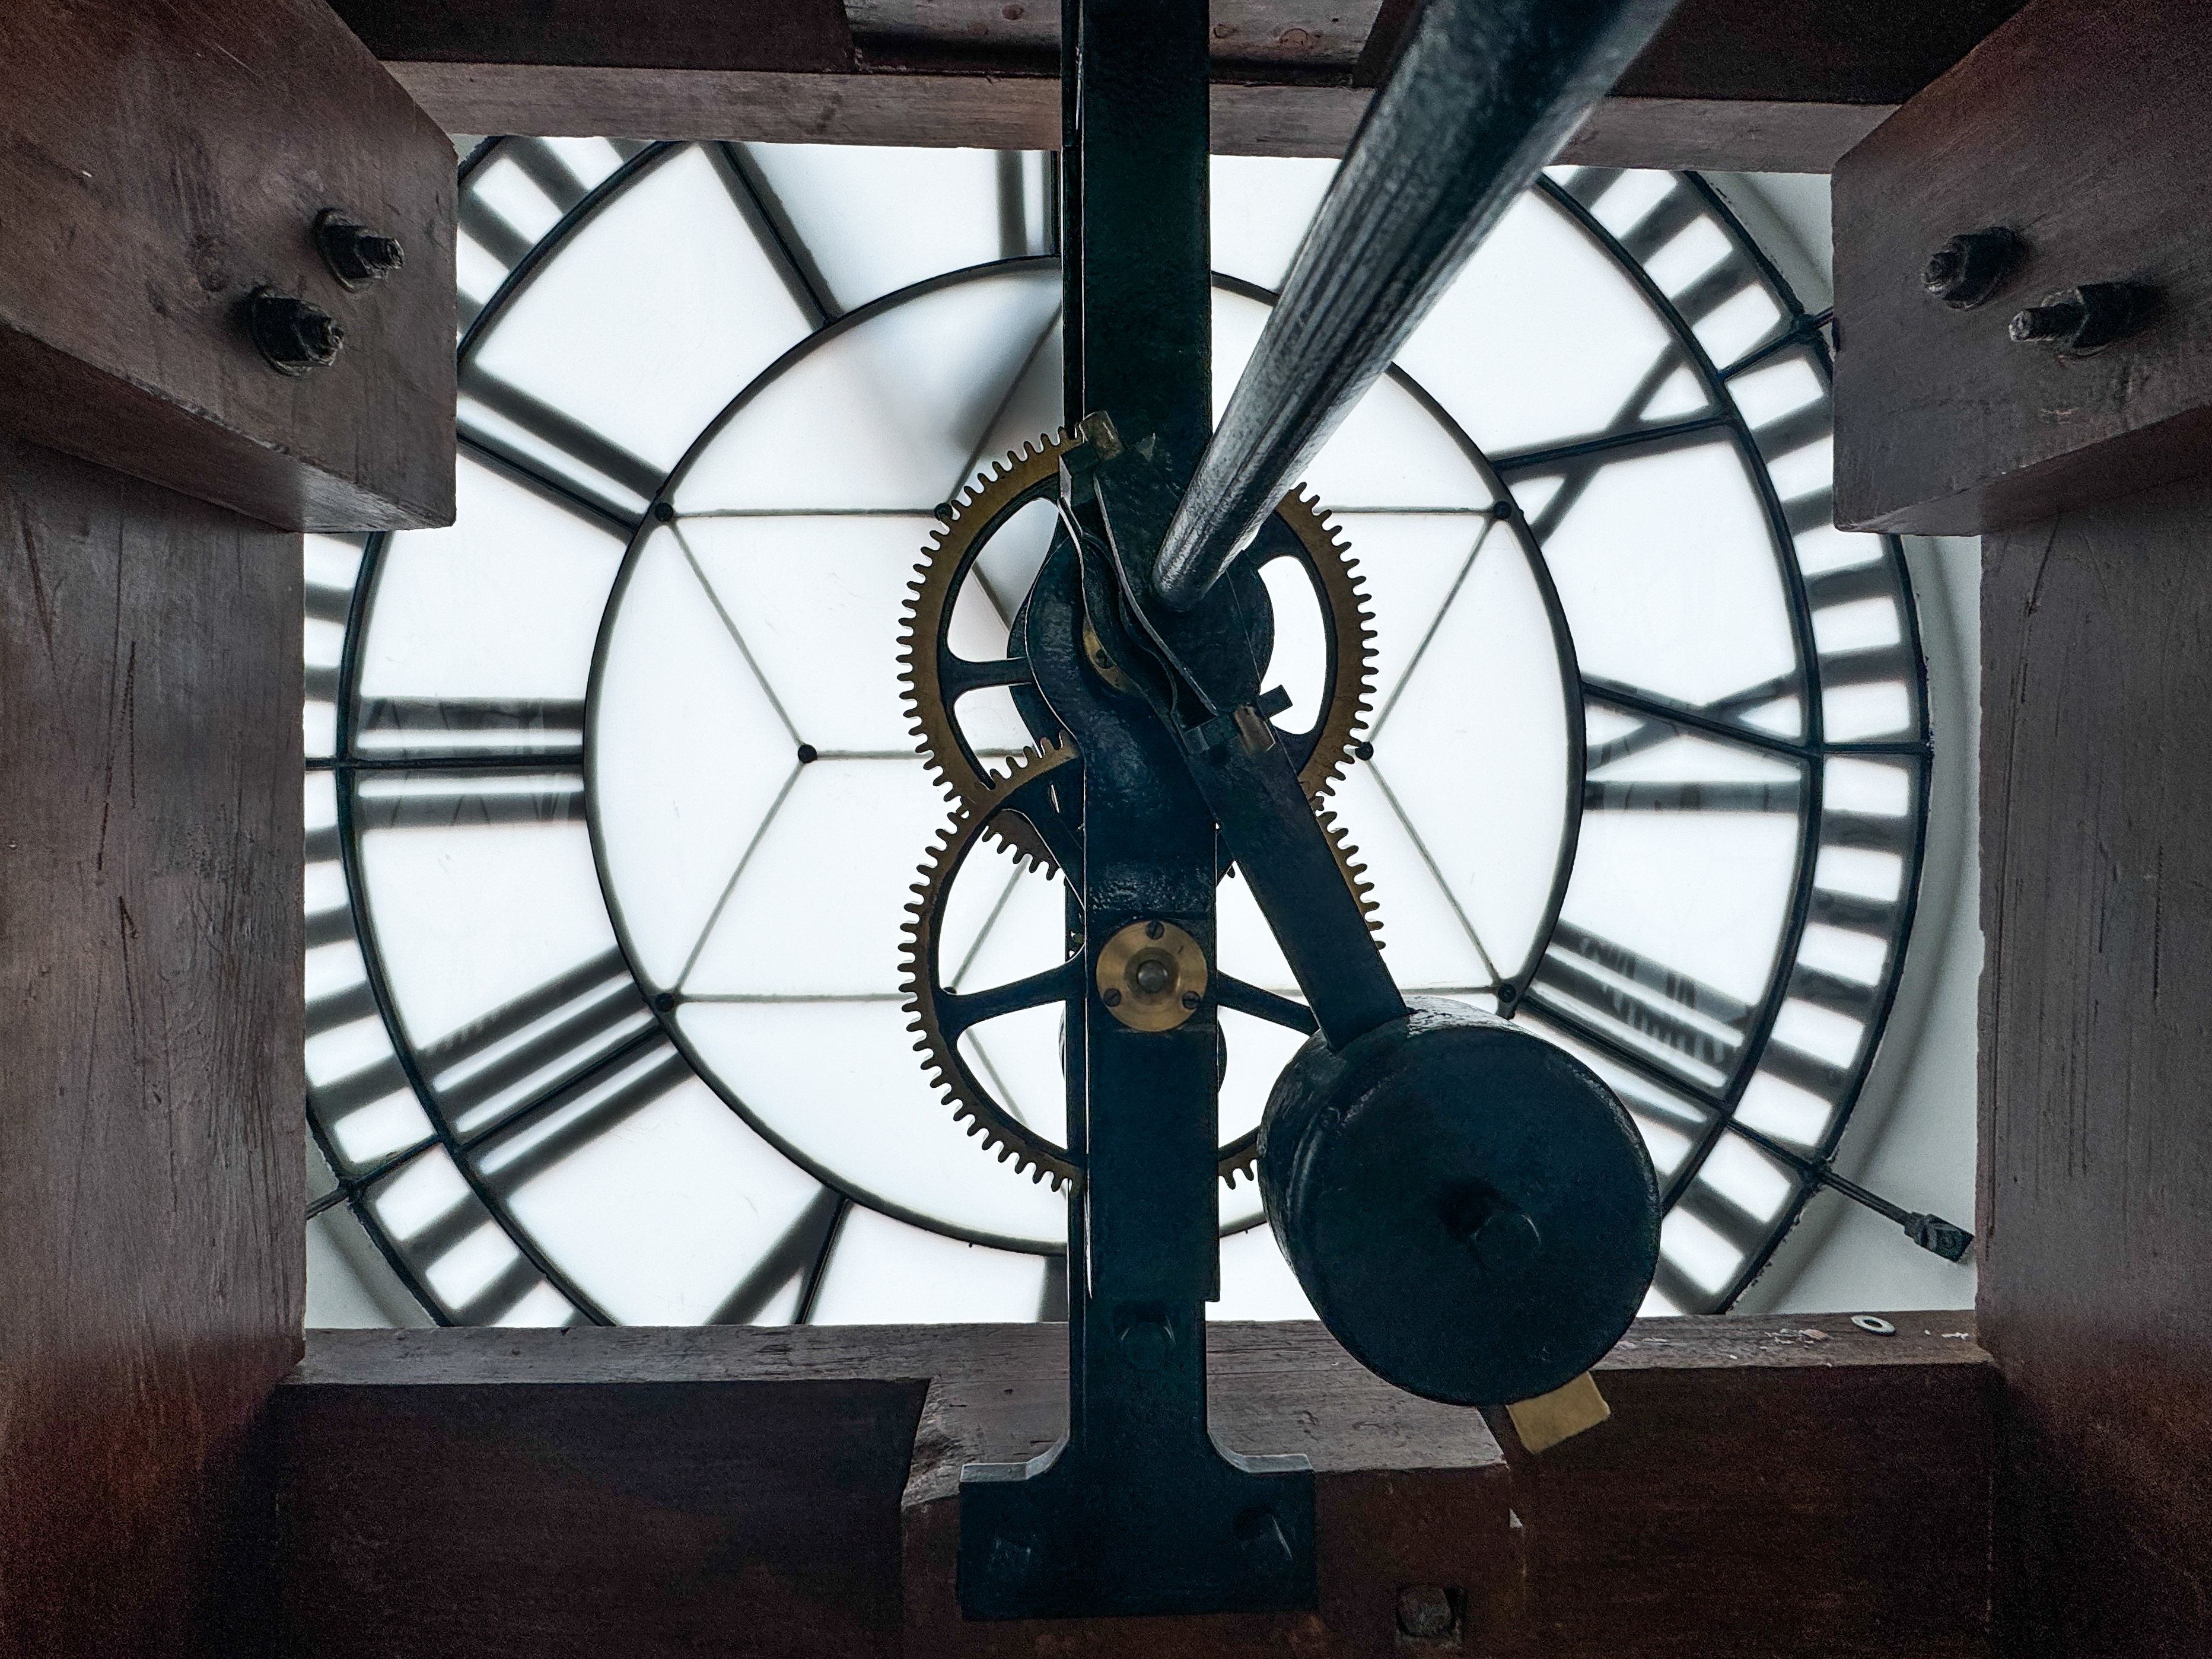 The mechanism behind the clock’s ticking hands 